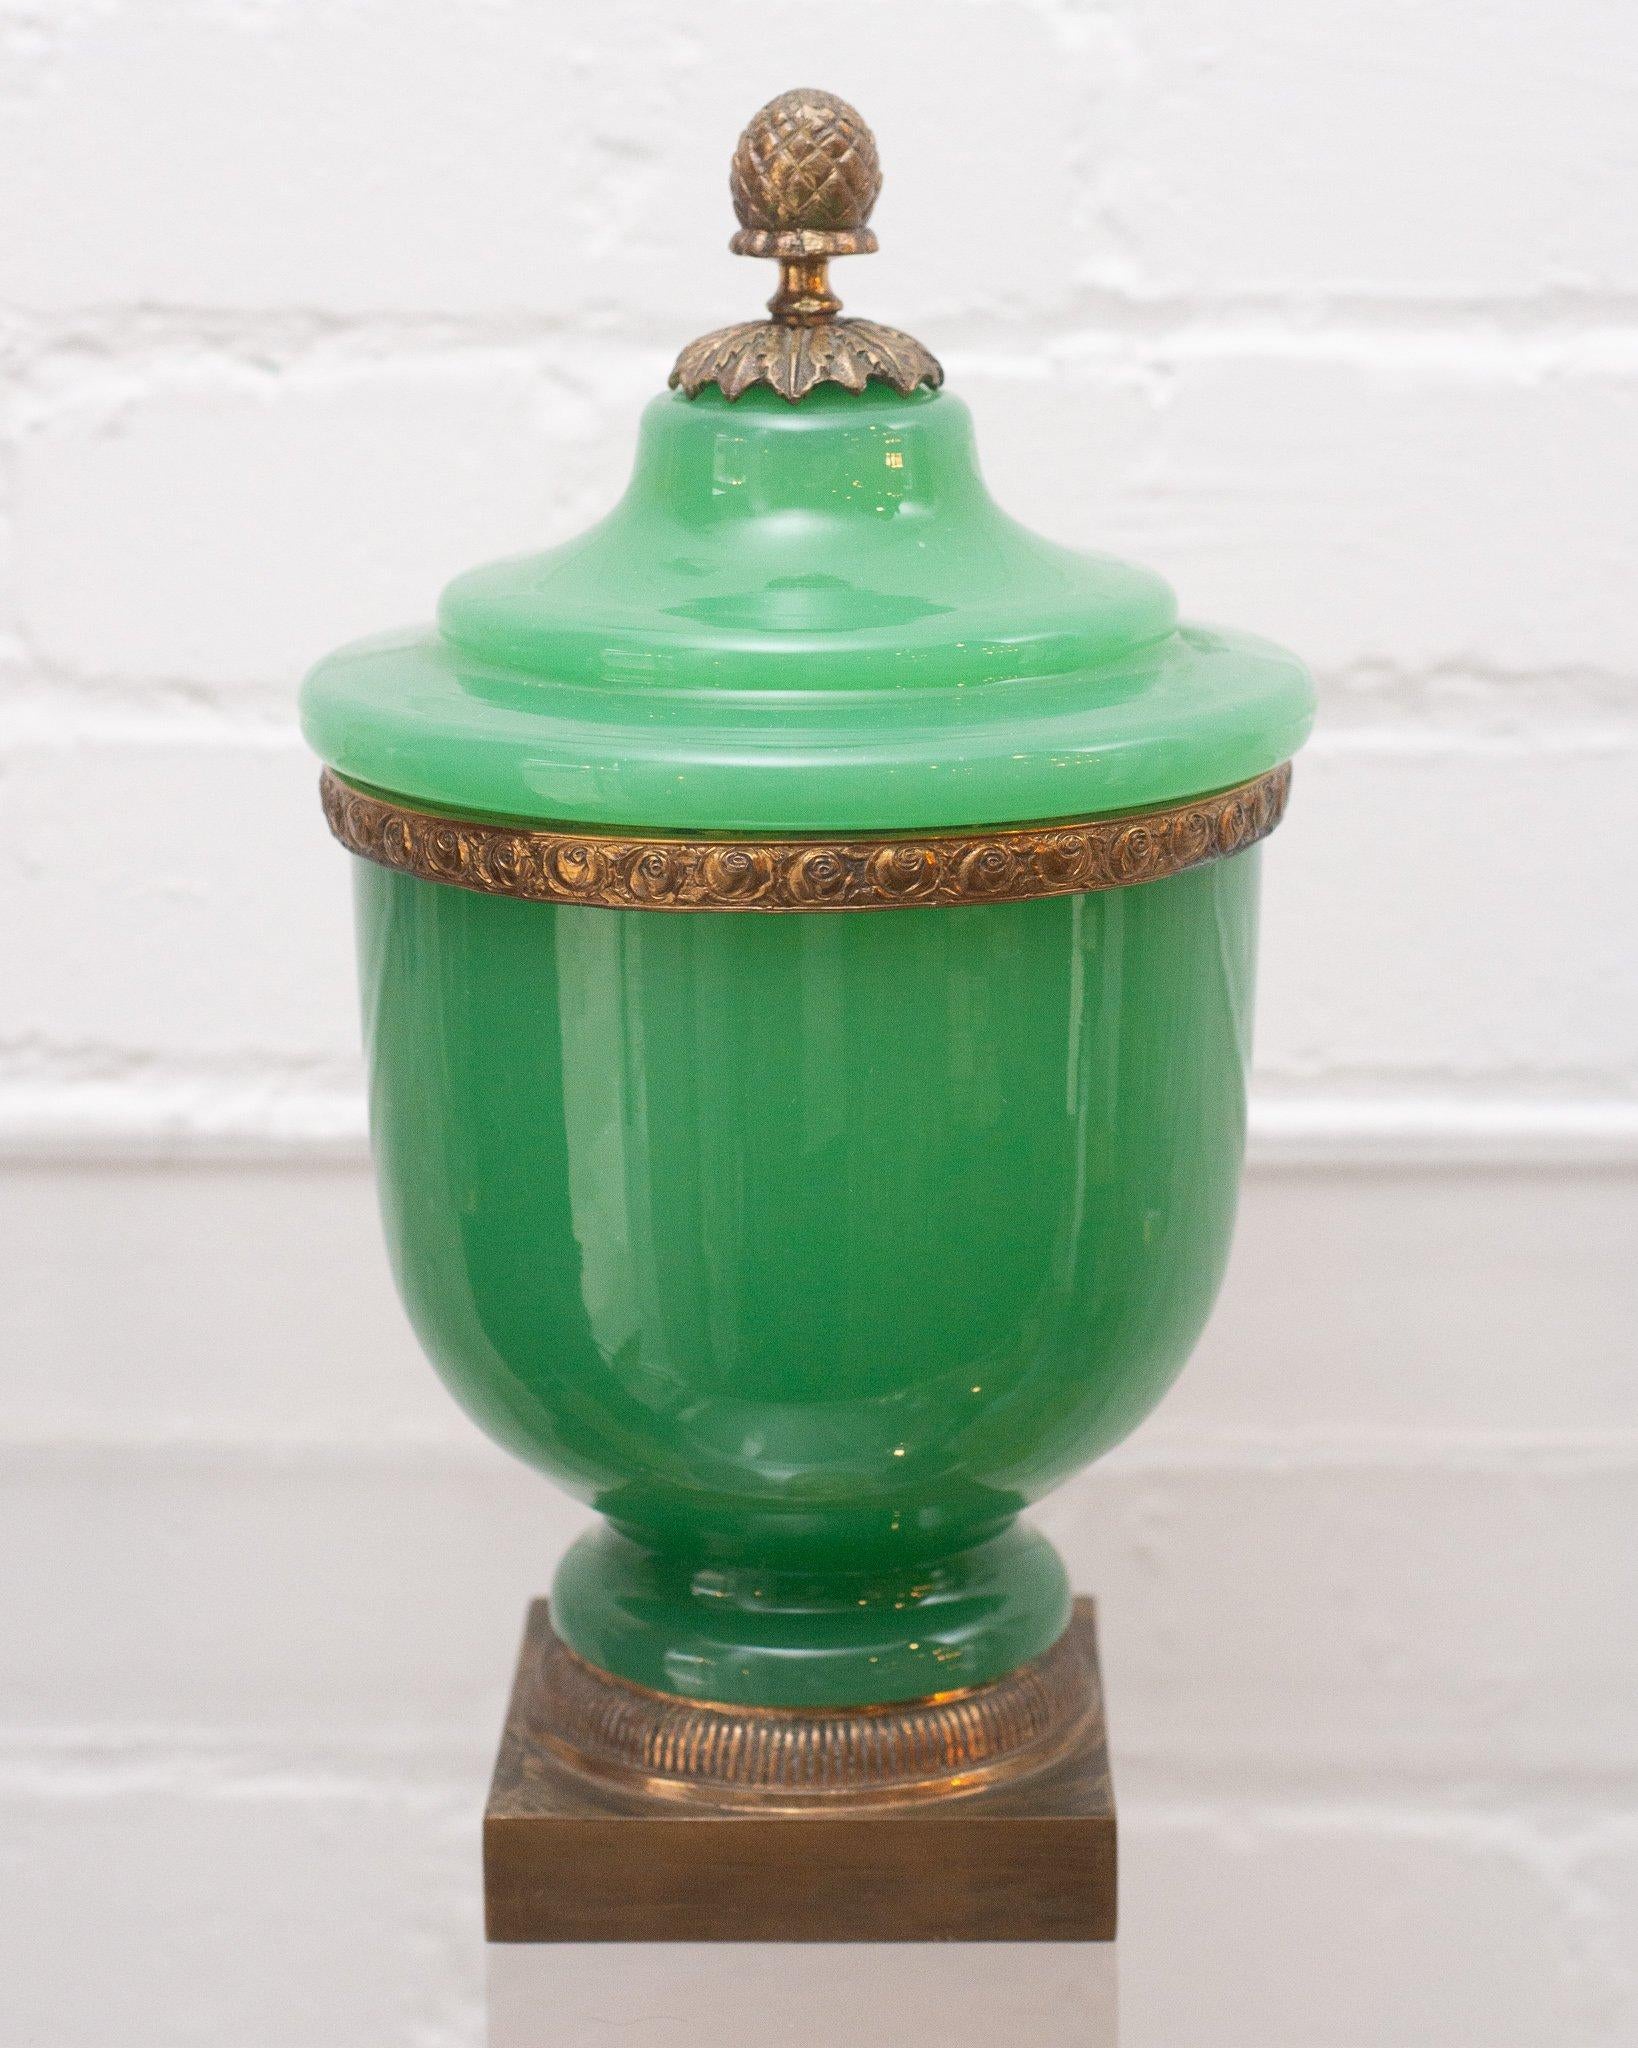 A large and opulent opaline large covered jar in a most unusual shade of green with bronze mounts and an acorn finial. Opaline glass was made in France between the years of 1810-1890. This fine example of the material is extremely sturdy and well